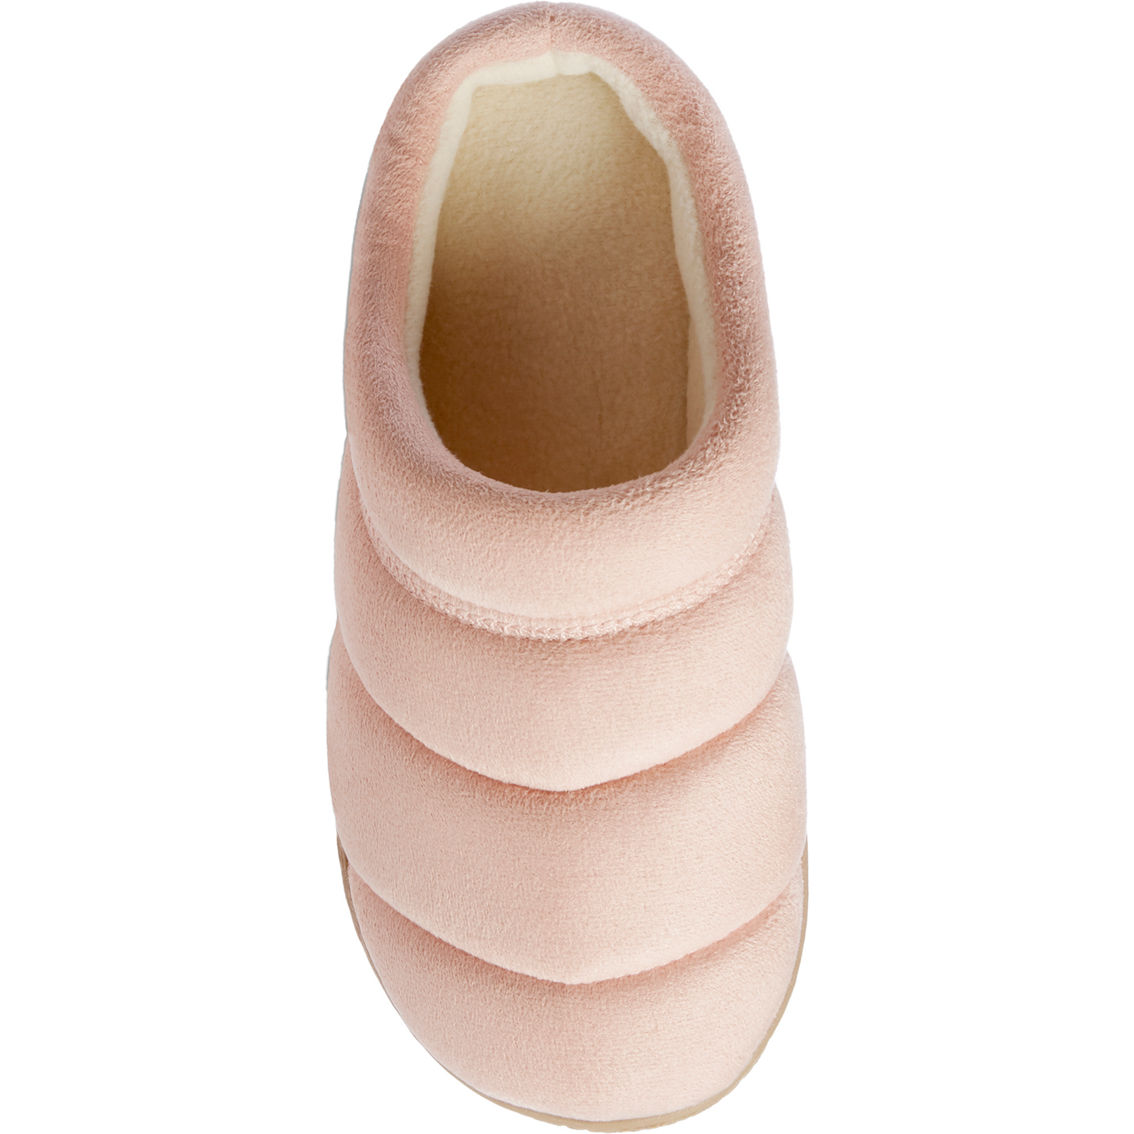 Isotoner Women's Totes Rory Recucled Microsuede Hoodback Slippers - Image 3 of 5